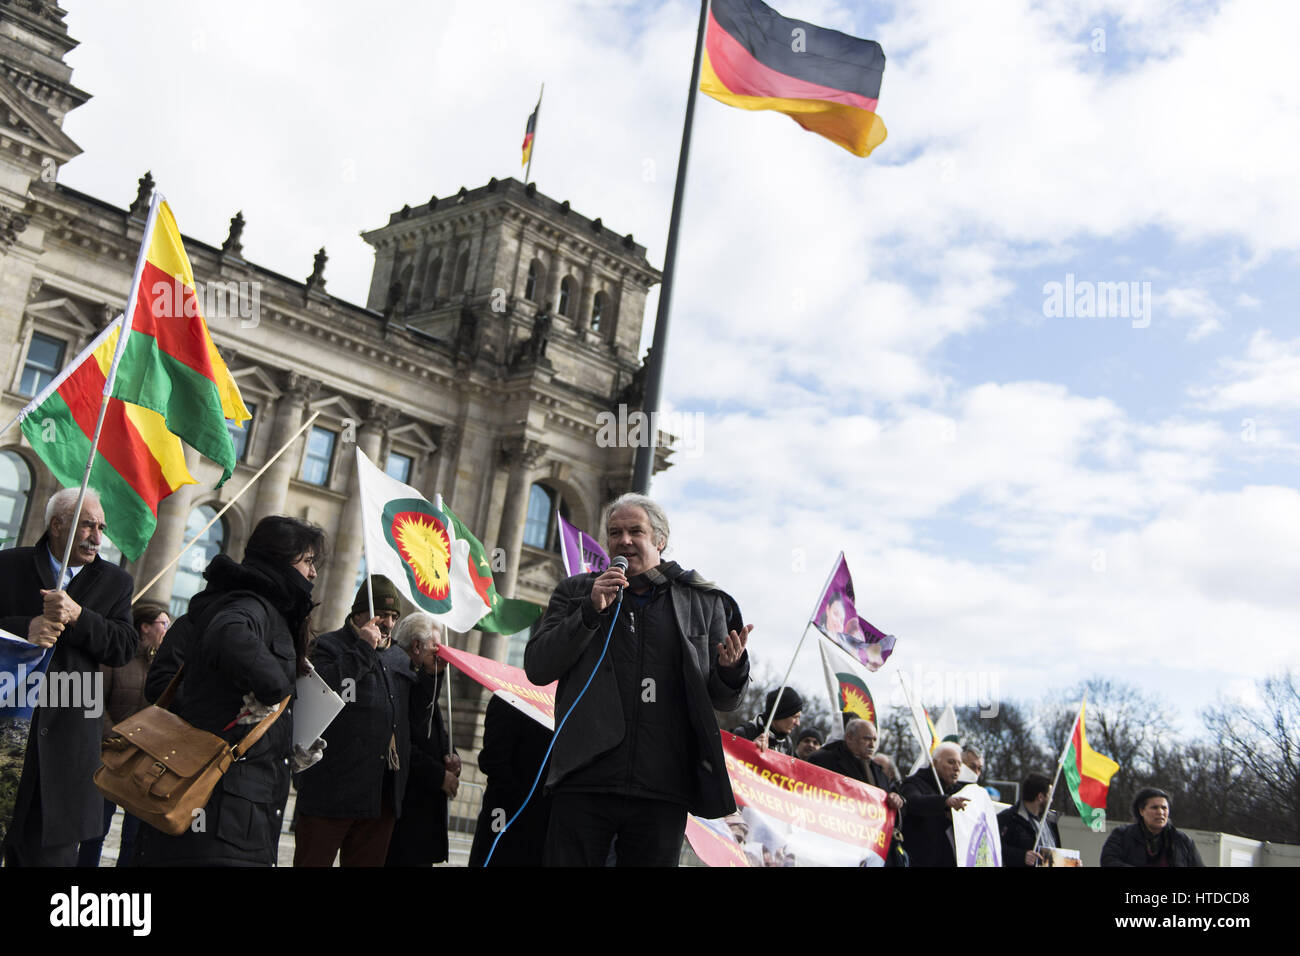 Berlin, Germany. 10th Mar, 2017. ANDREJ HUNKO, Mitglied des Deutschen Bundestags fÃ¼r die Partei Die Linke, speaks in front of the protesters. Yezidi representatives and Kurds demanding political support in front of the German Reichstag-Building for the people in Sinjar. The situation of the Yezidians, a thousand-year monotheistic religious community, has worsened after Kurdish Peschmergas attacked the Kurdish Yezidian units in Shengal. Credit: Jan Scheunert/ZUMA Wire/Alamy Live News Stock Photo